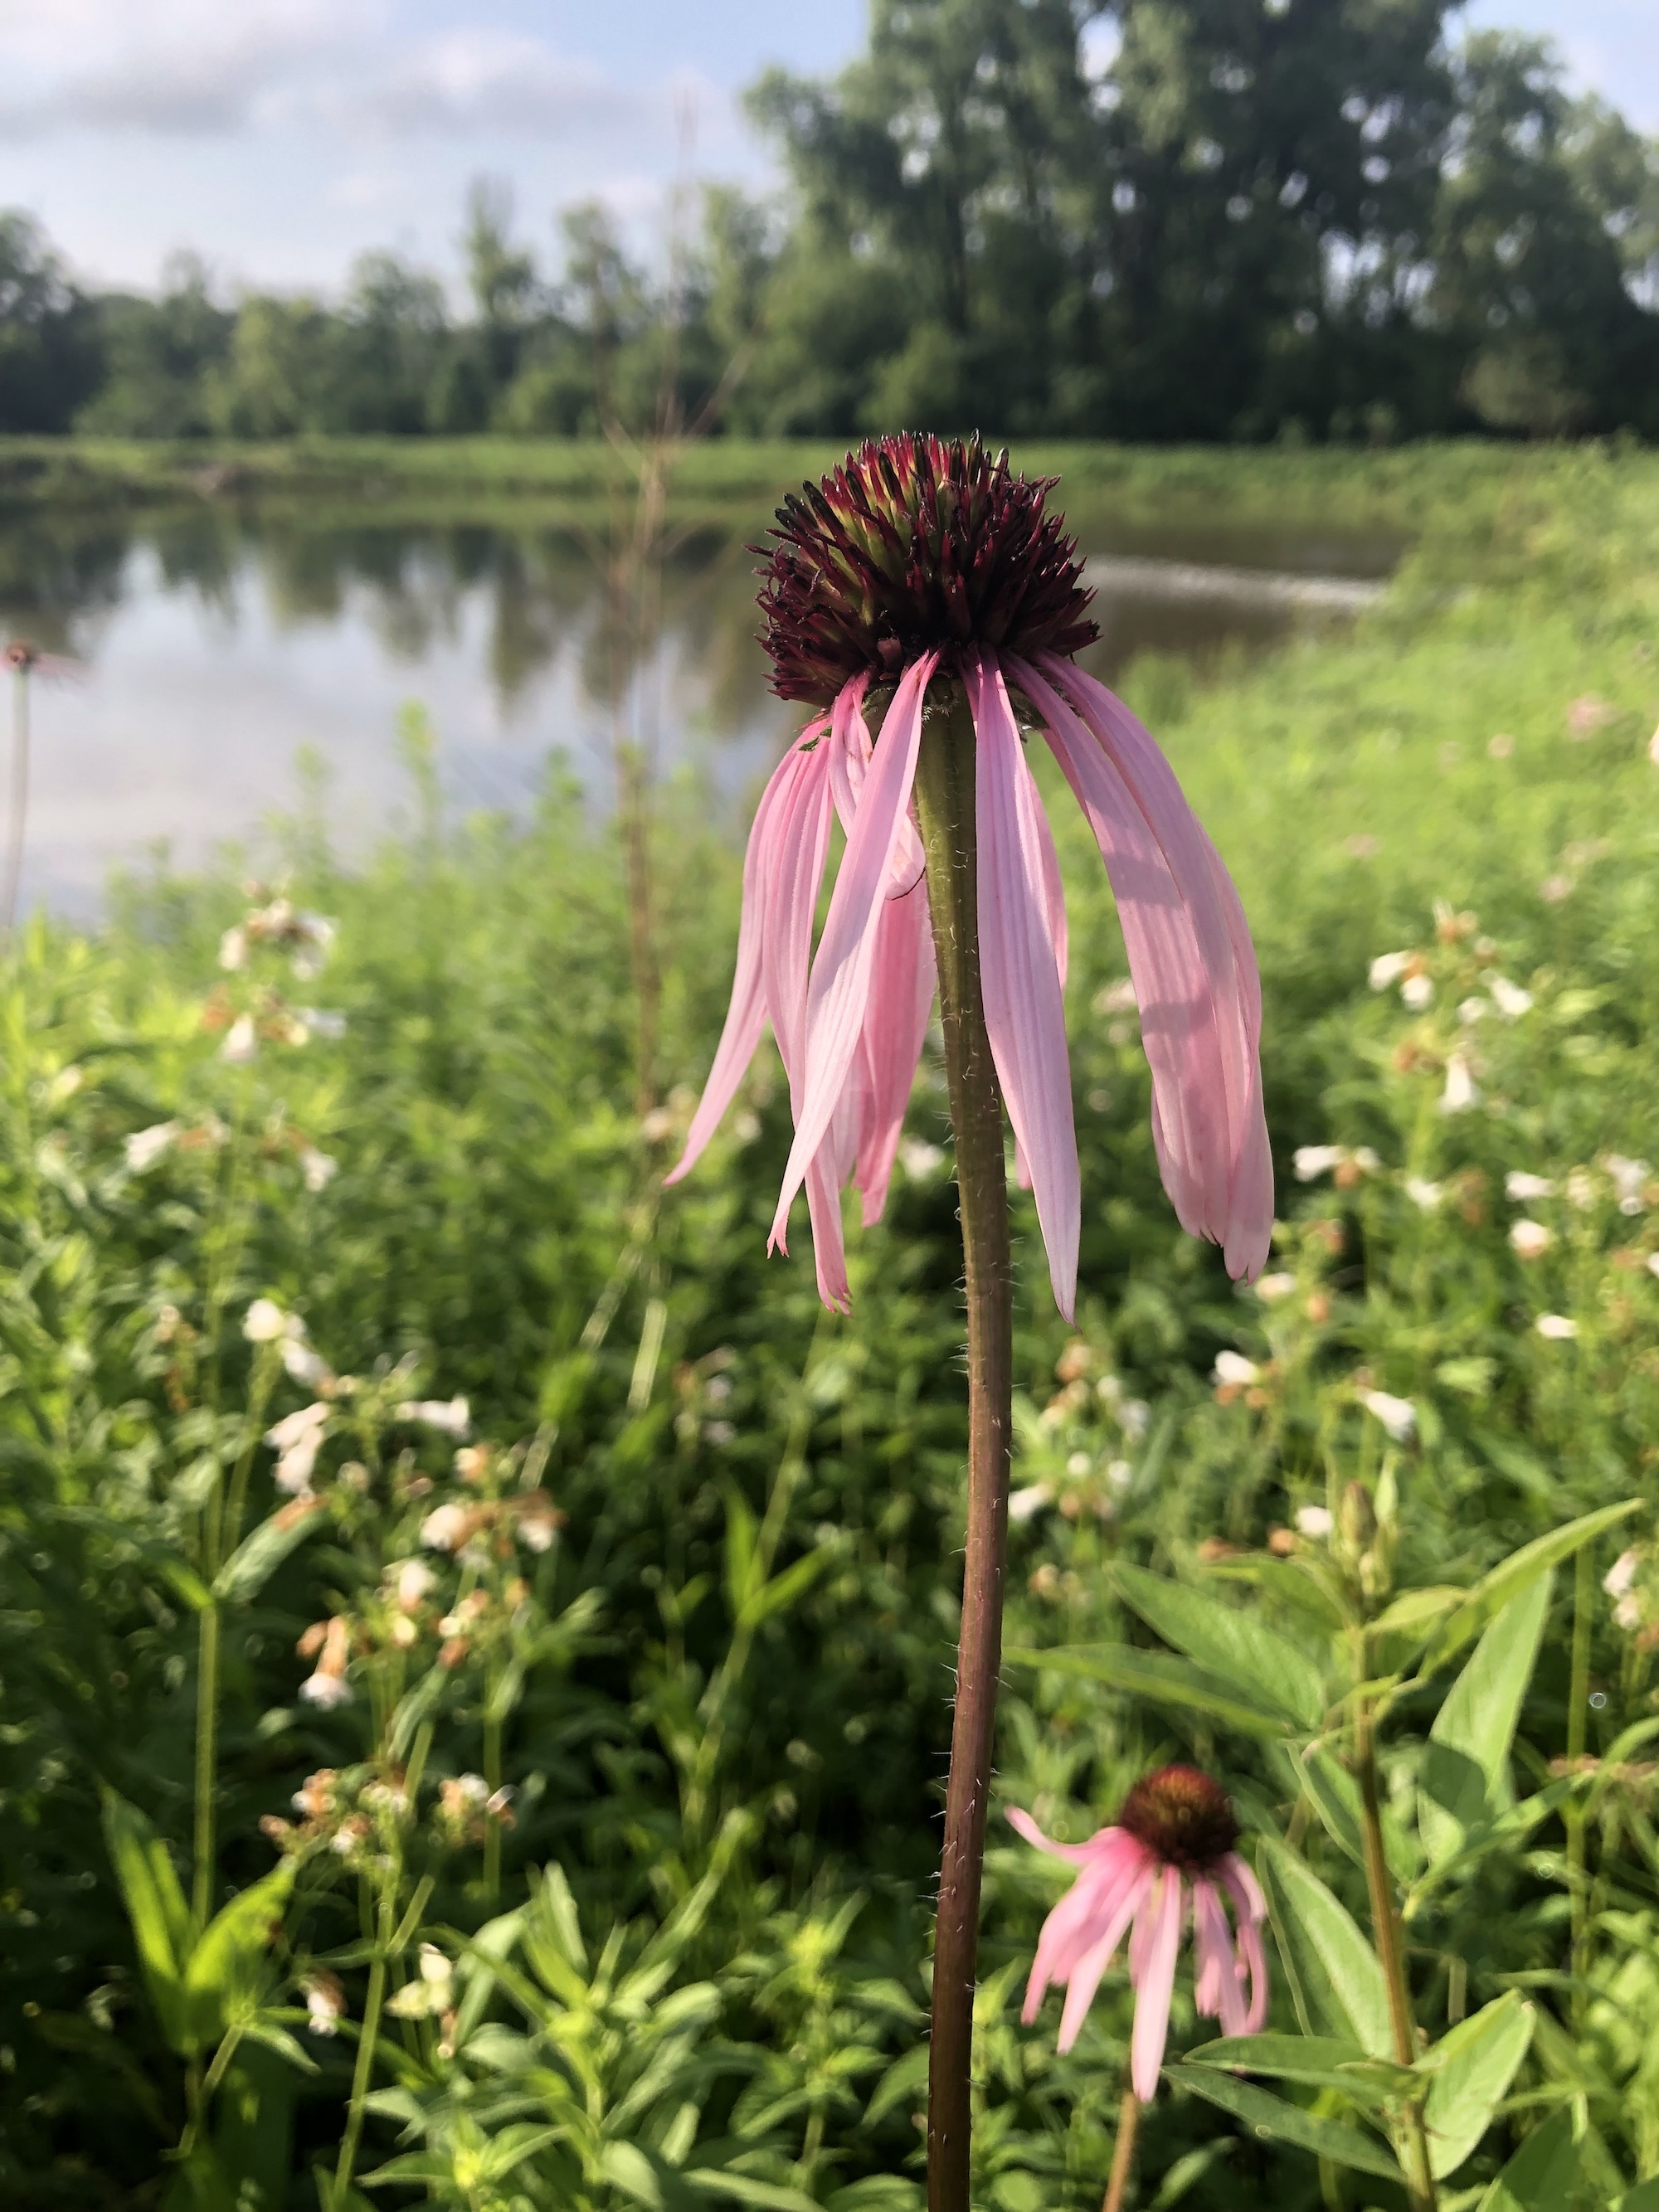 Pale purple coneflower on bank of Retaining Pond on corner of Nakoma Road and Manitou Way on June 18, 2021.